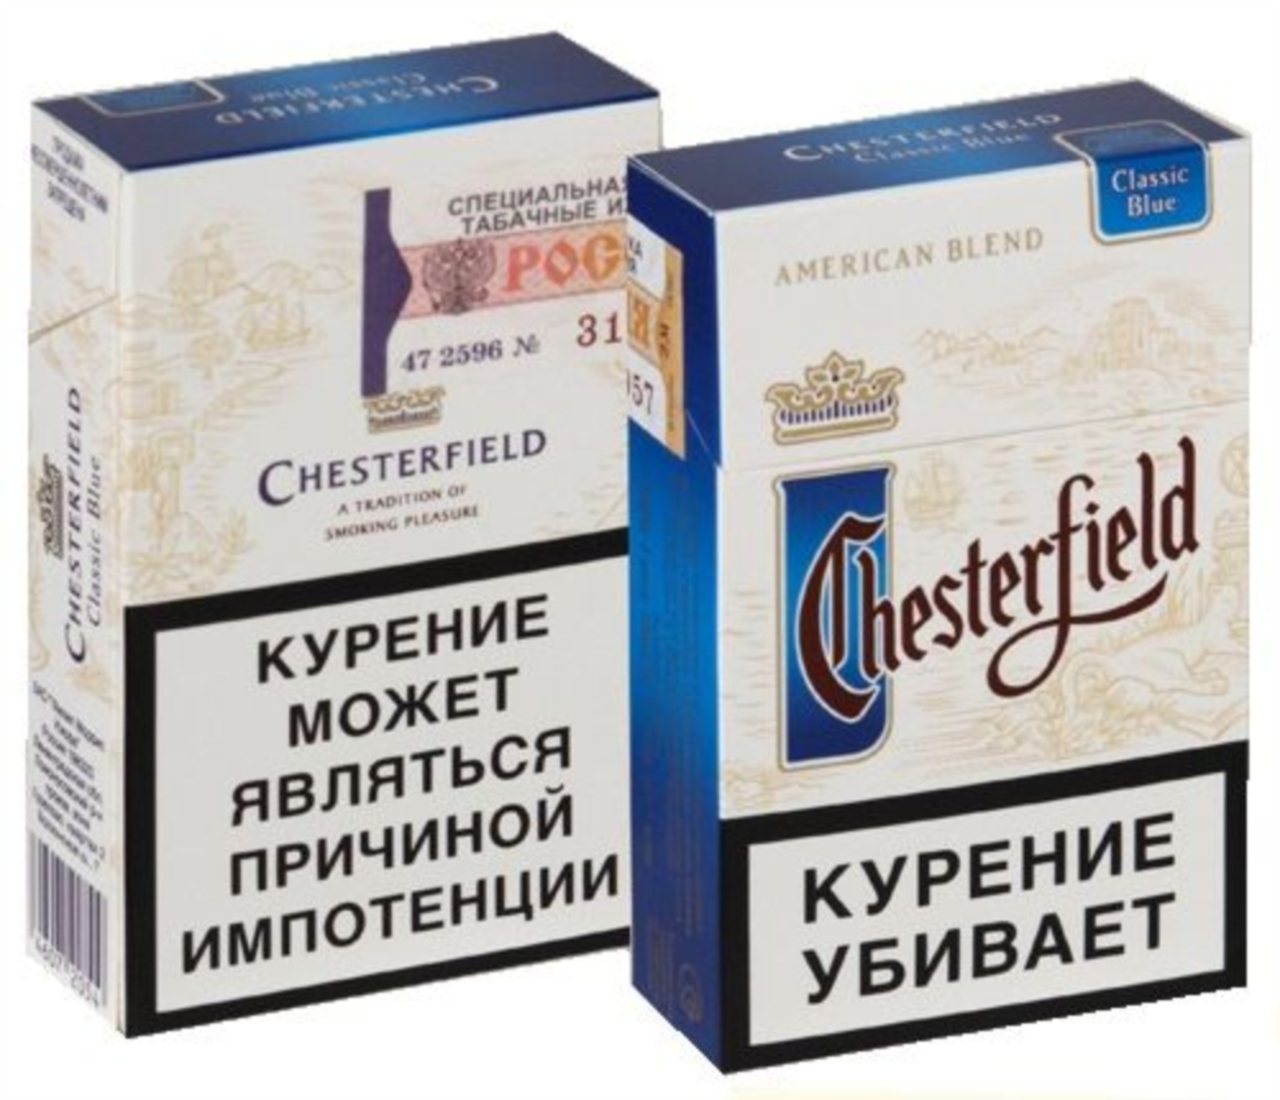 Мертвец69 - Пачка Chesterfield